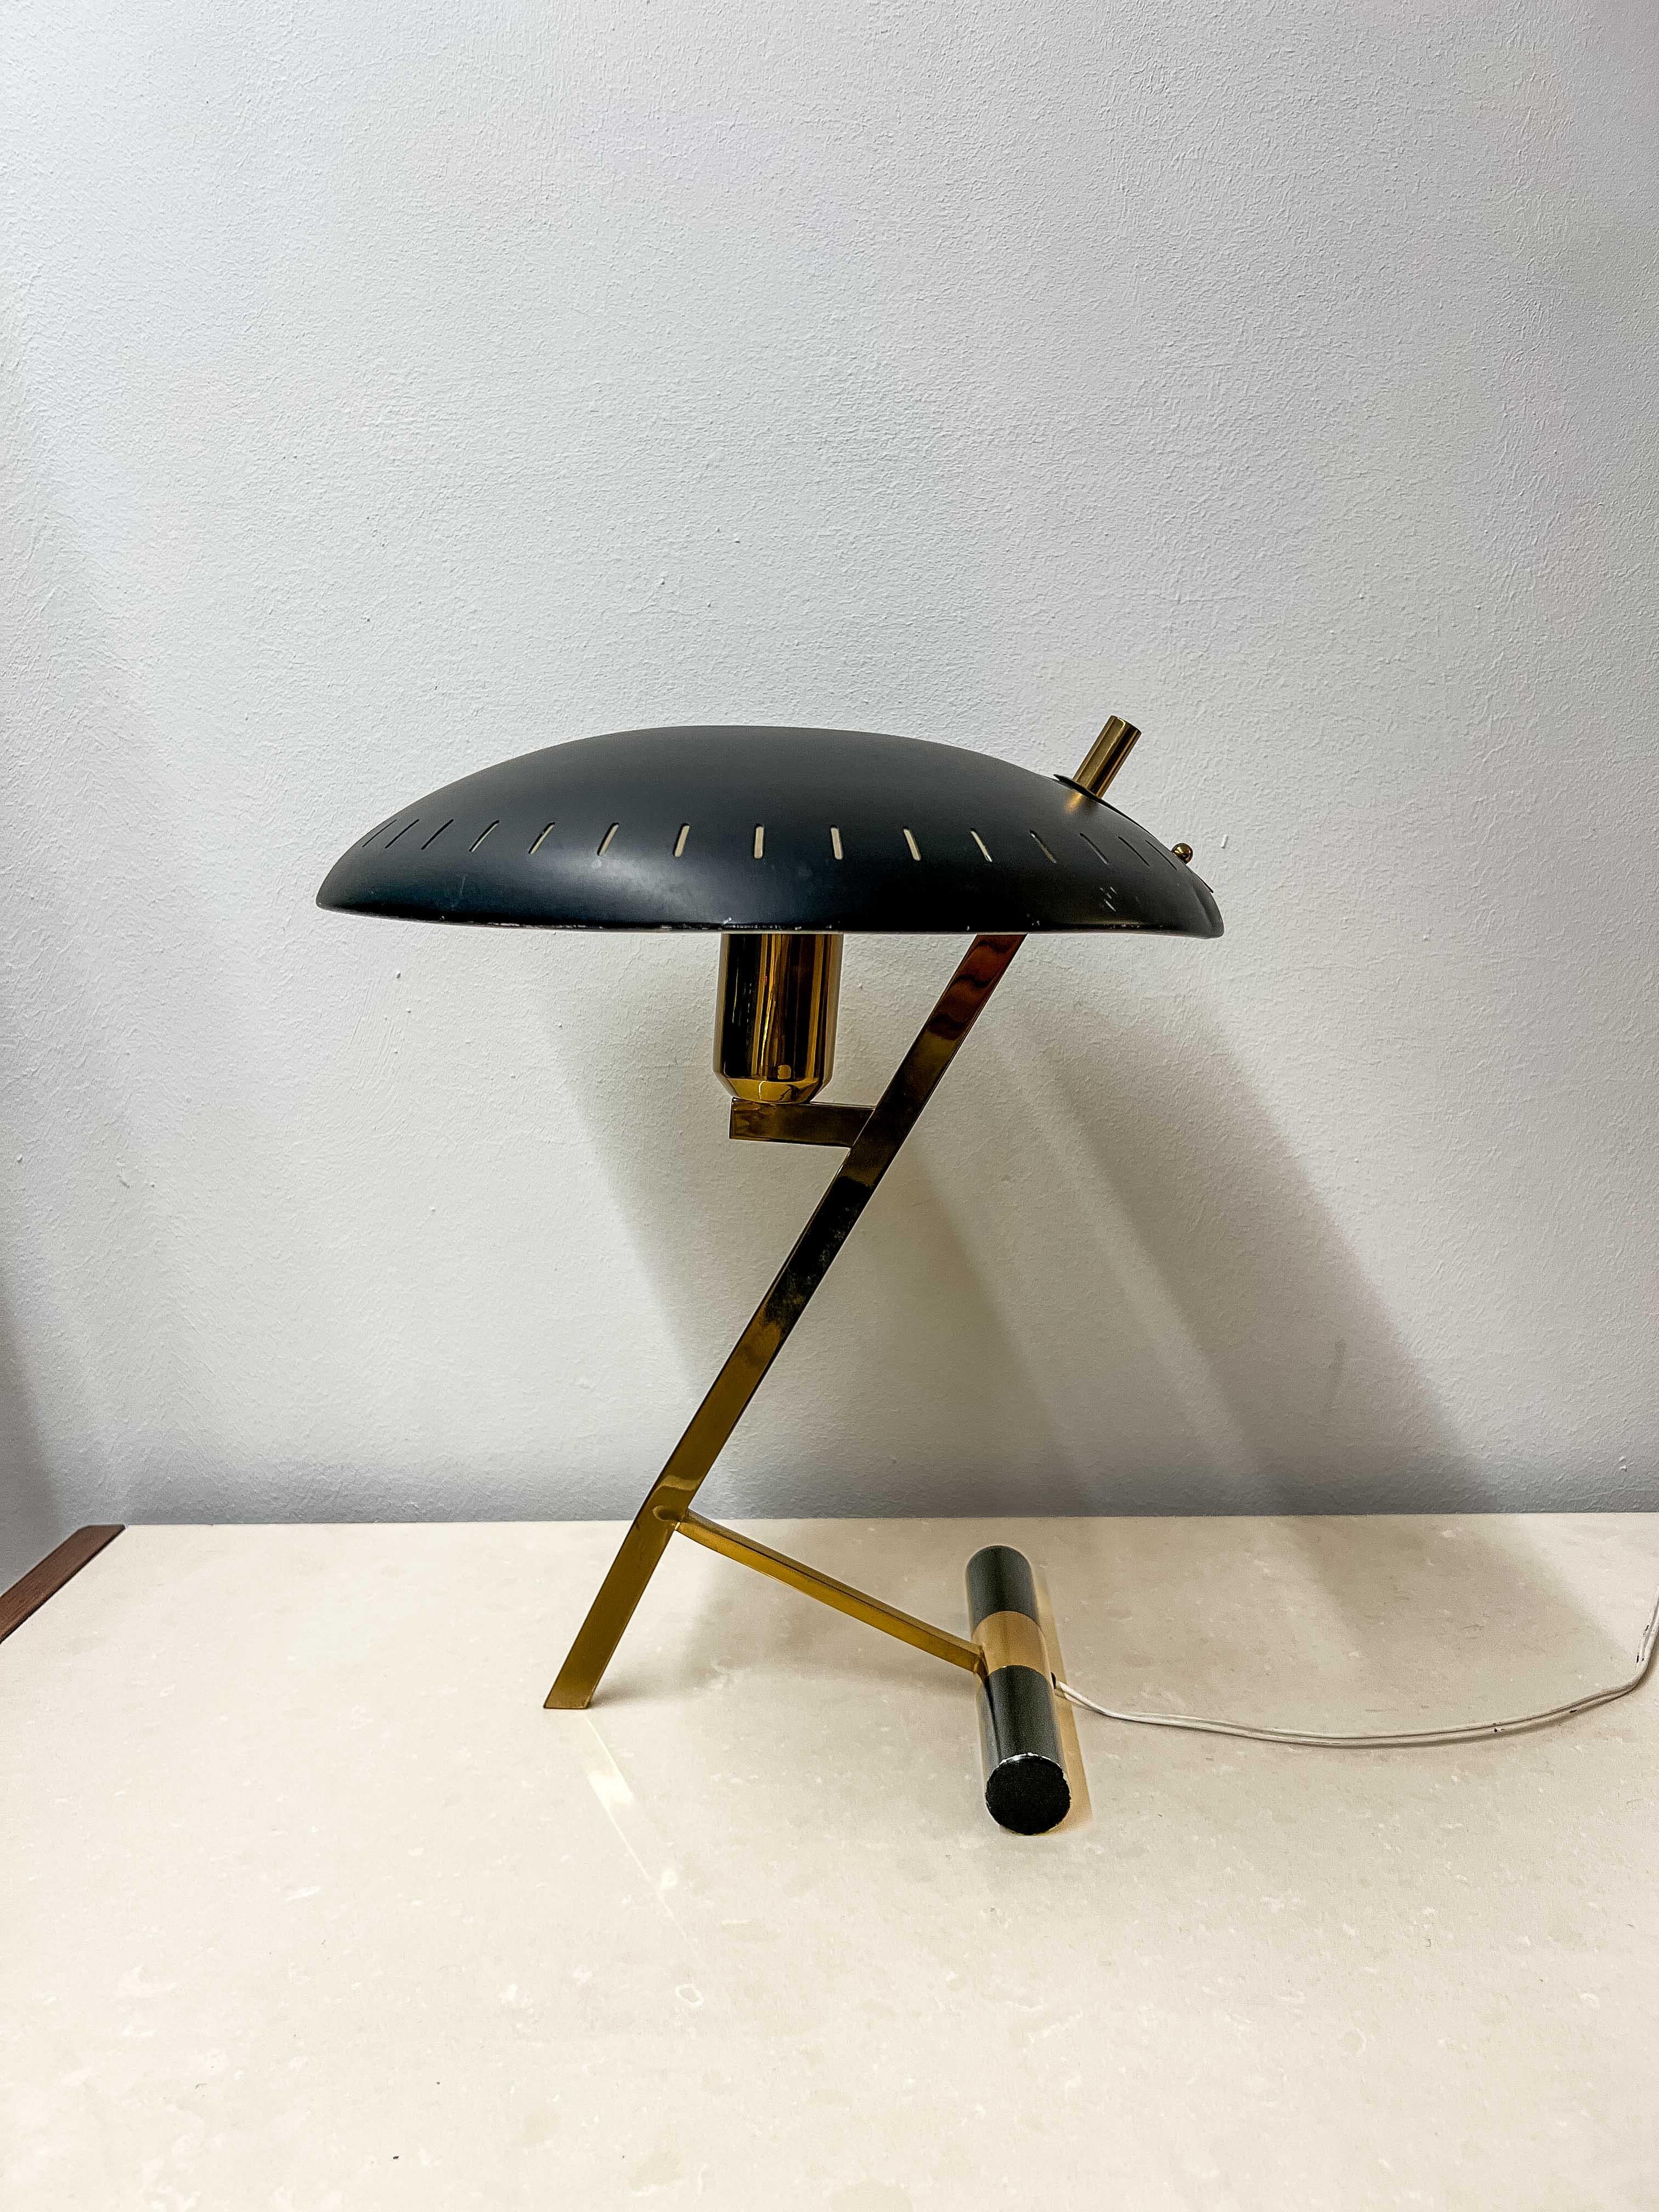 The “Decora” desk lamp, designed by Louis Kalff for Philips, is a true testament to the mid-century modern design movement. With its distinctive UFO-shaped shade and elegant, angular brass stand, this lamp exemplifies the sleek functionality and